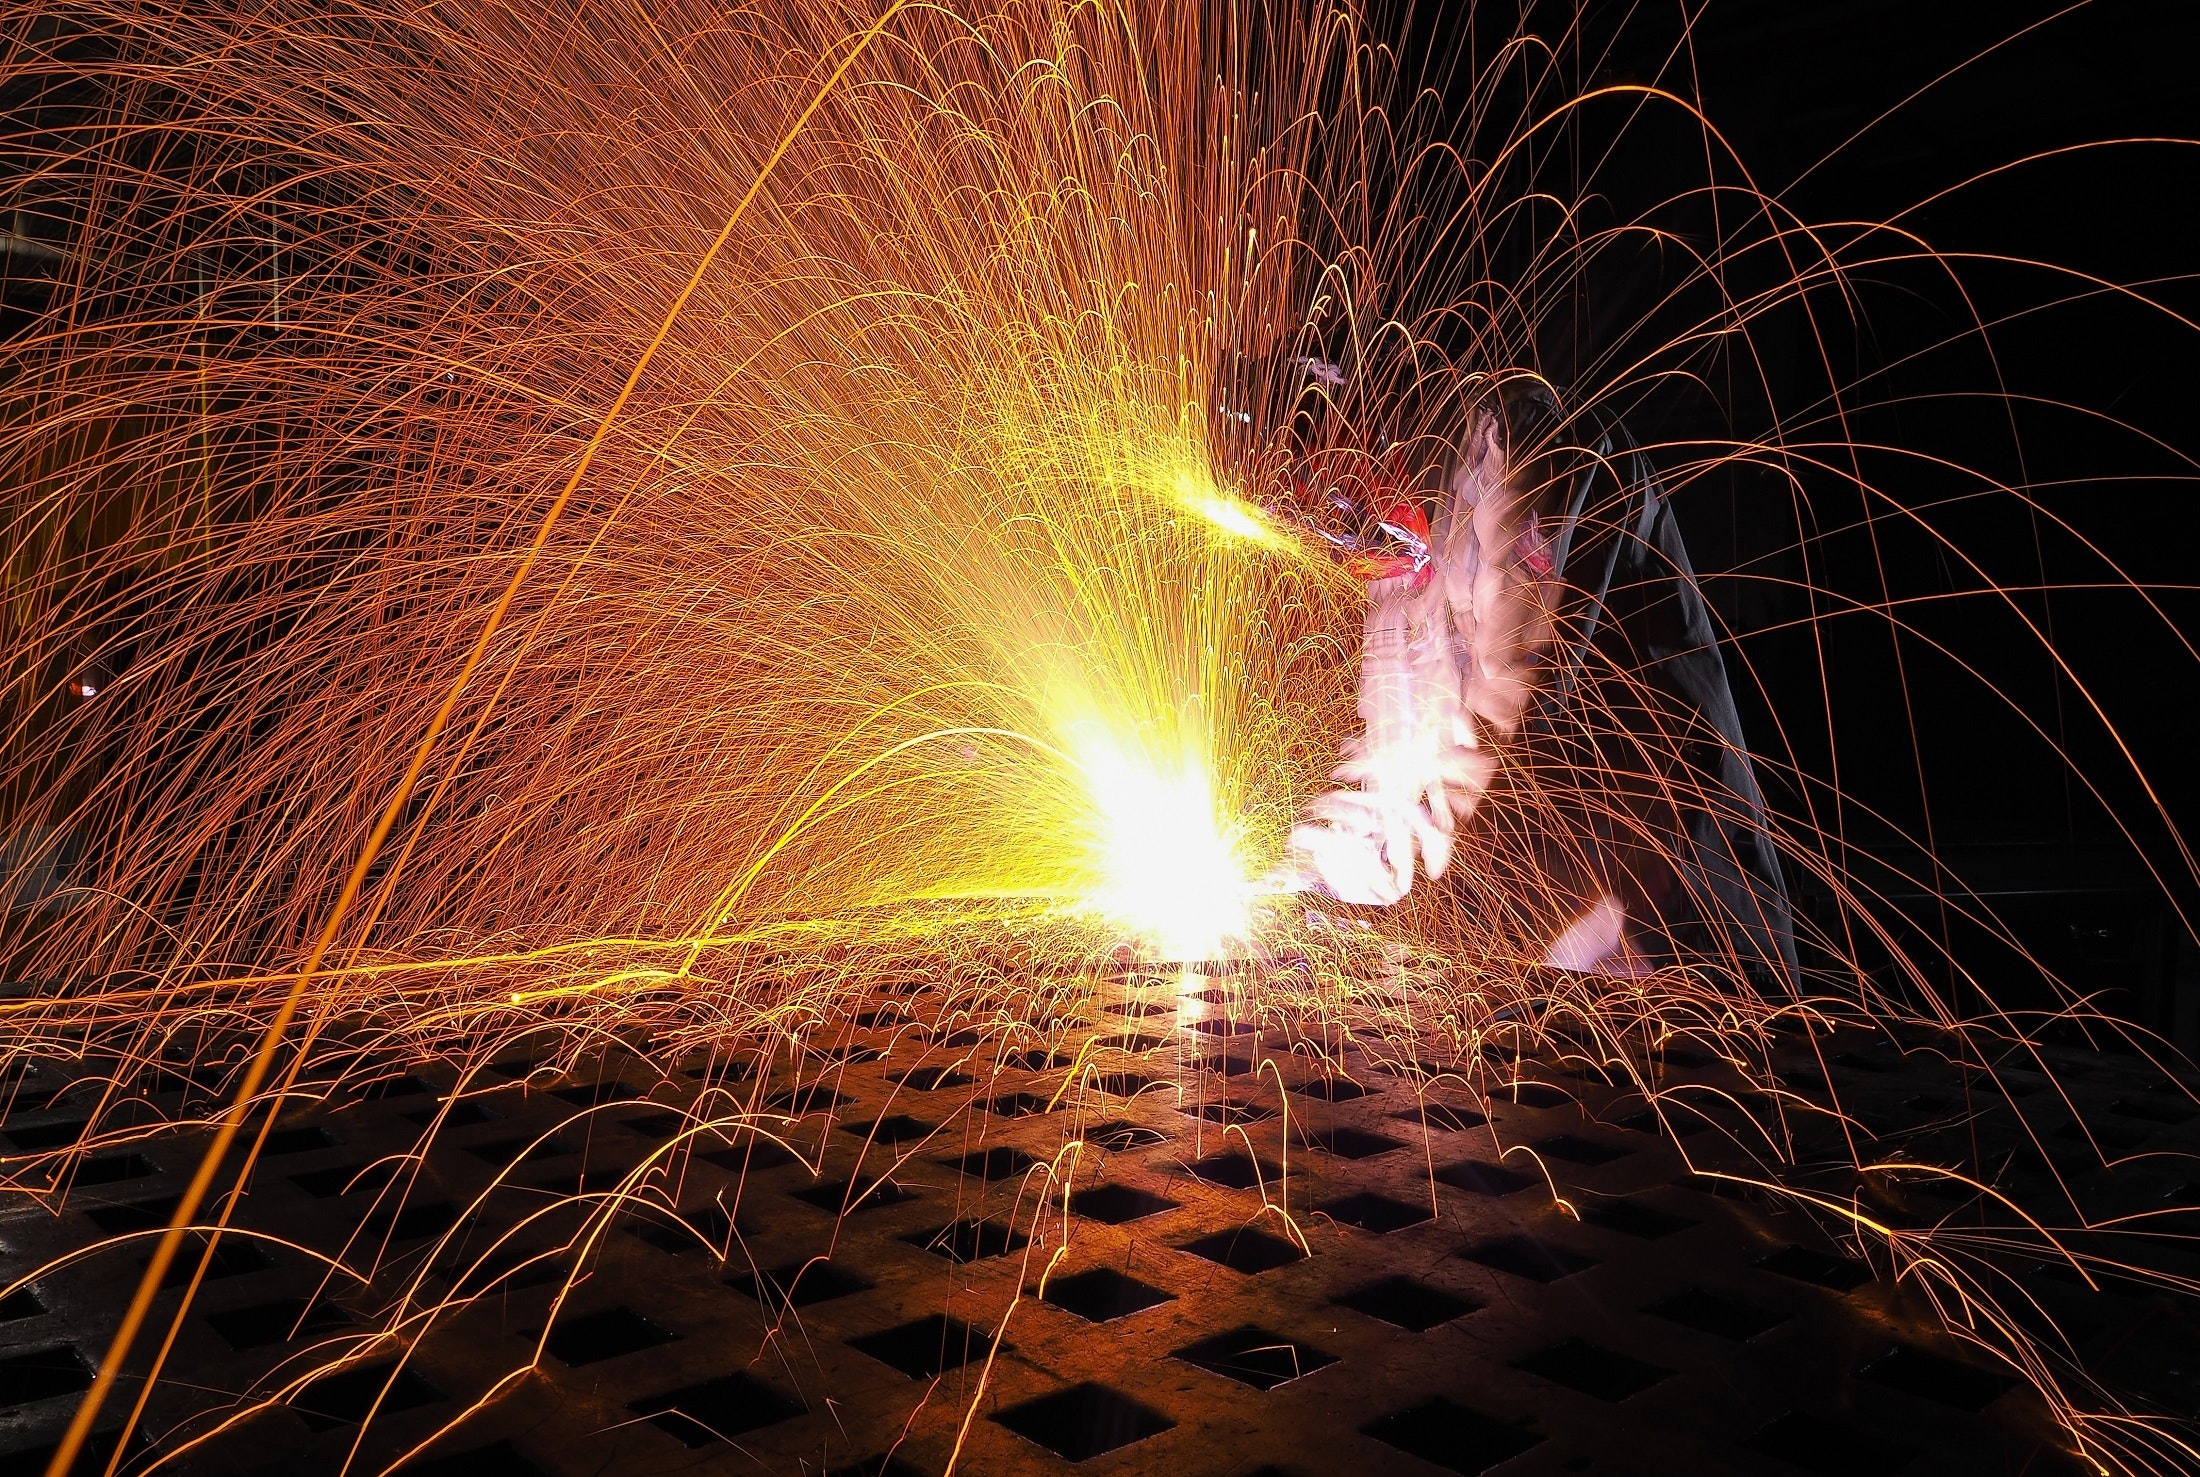 man welding and sparks flying